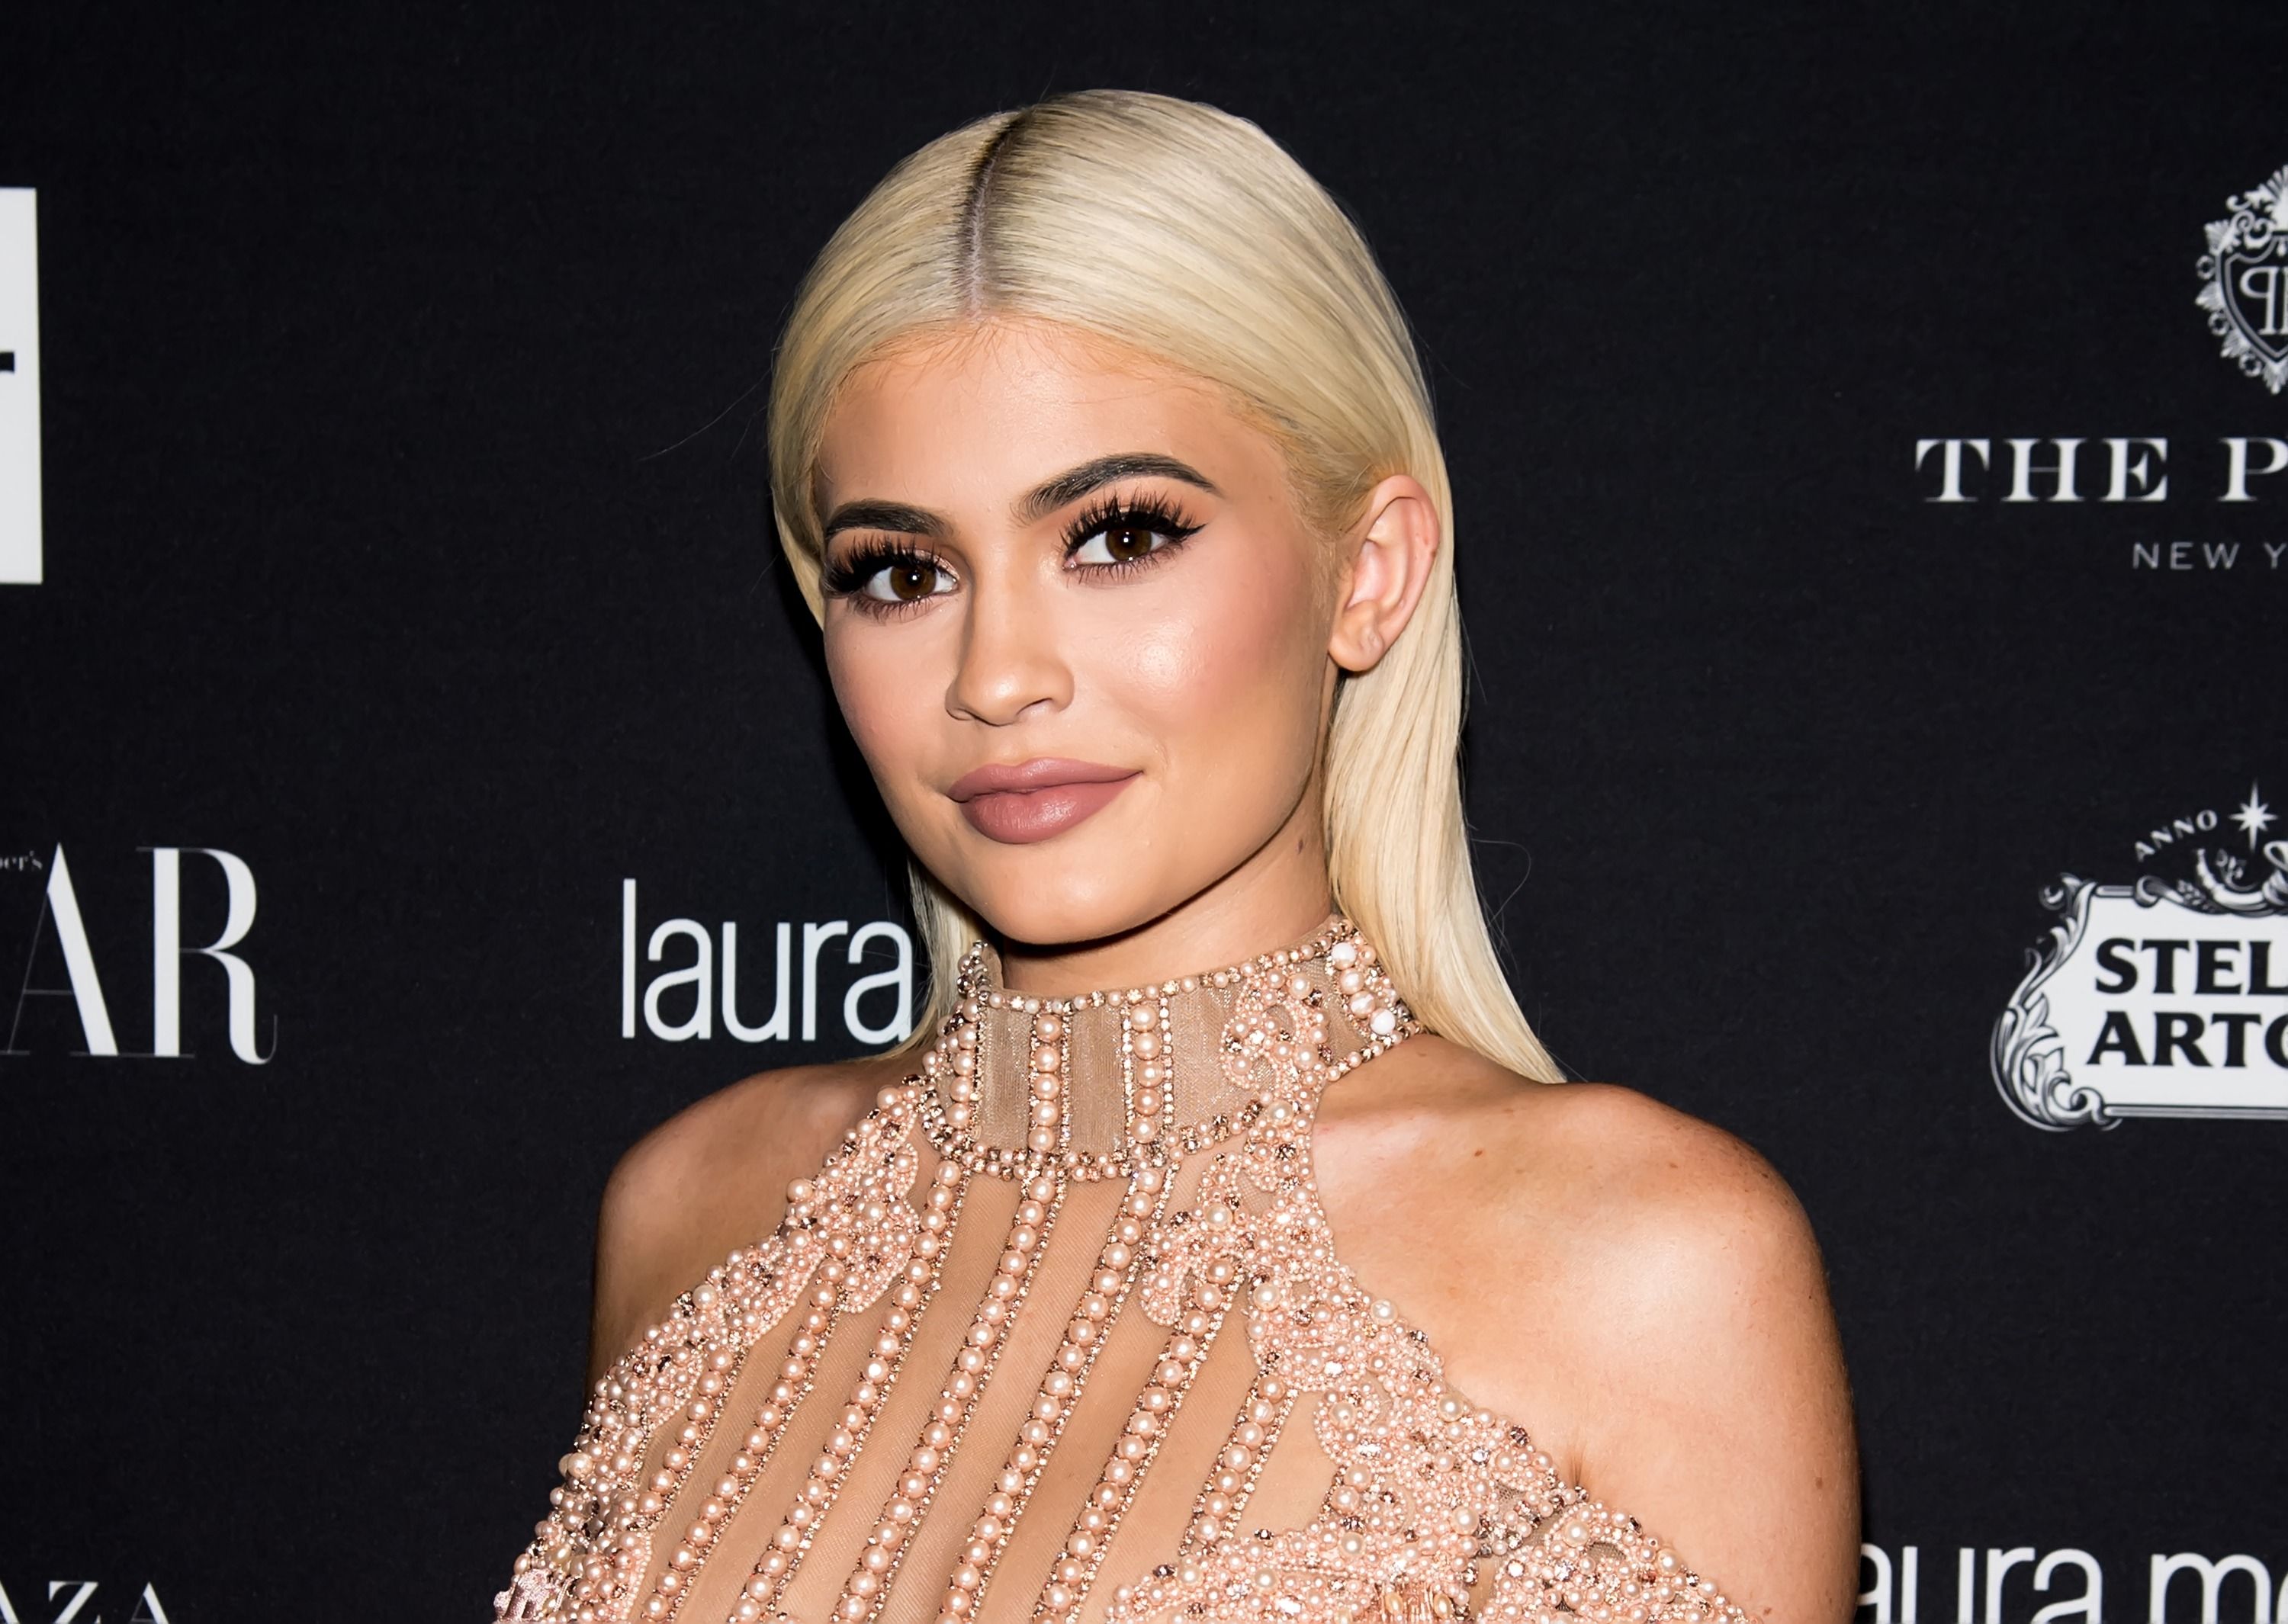 TV Personality Kylie Jenner attends Harper's BAZAAR Celebrates 'ICONS By Carine Roitfeld' at The Plaza Hotel in New York City | Photo: Getty Images